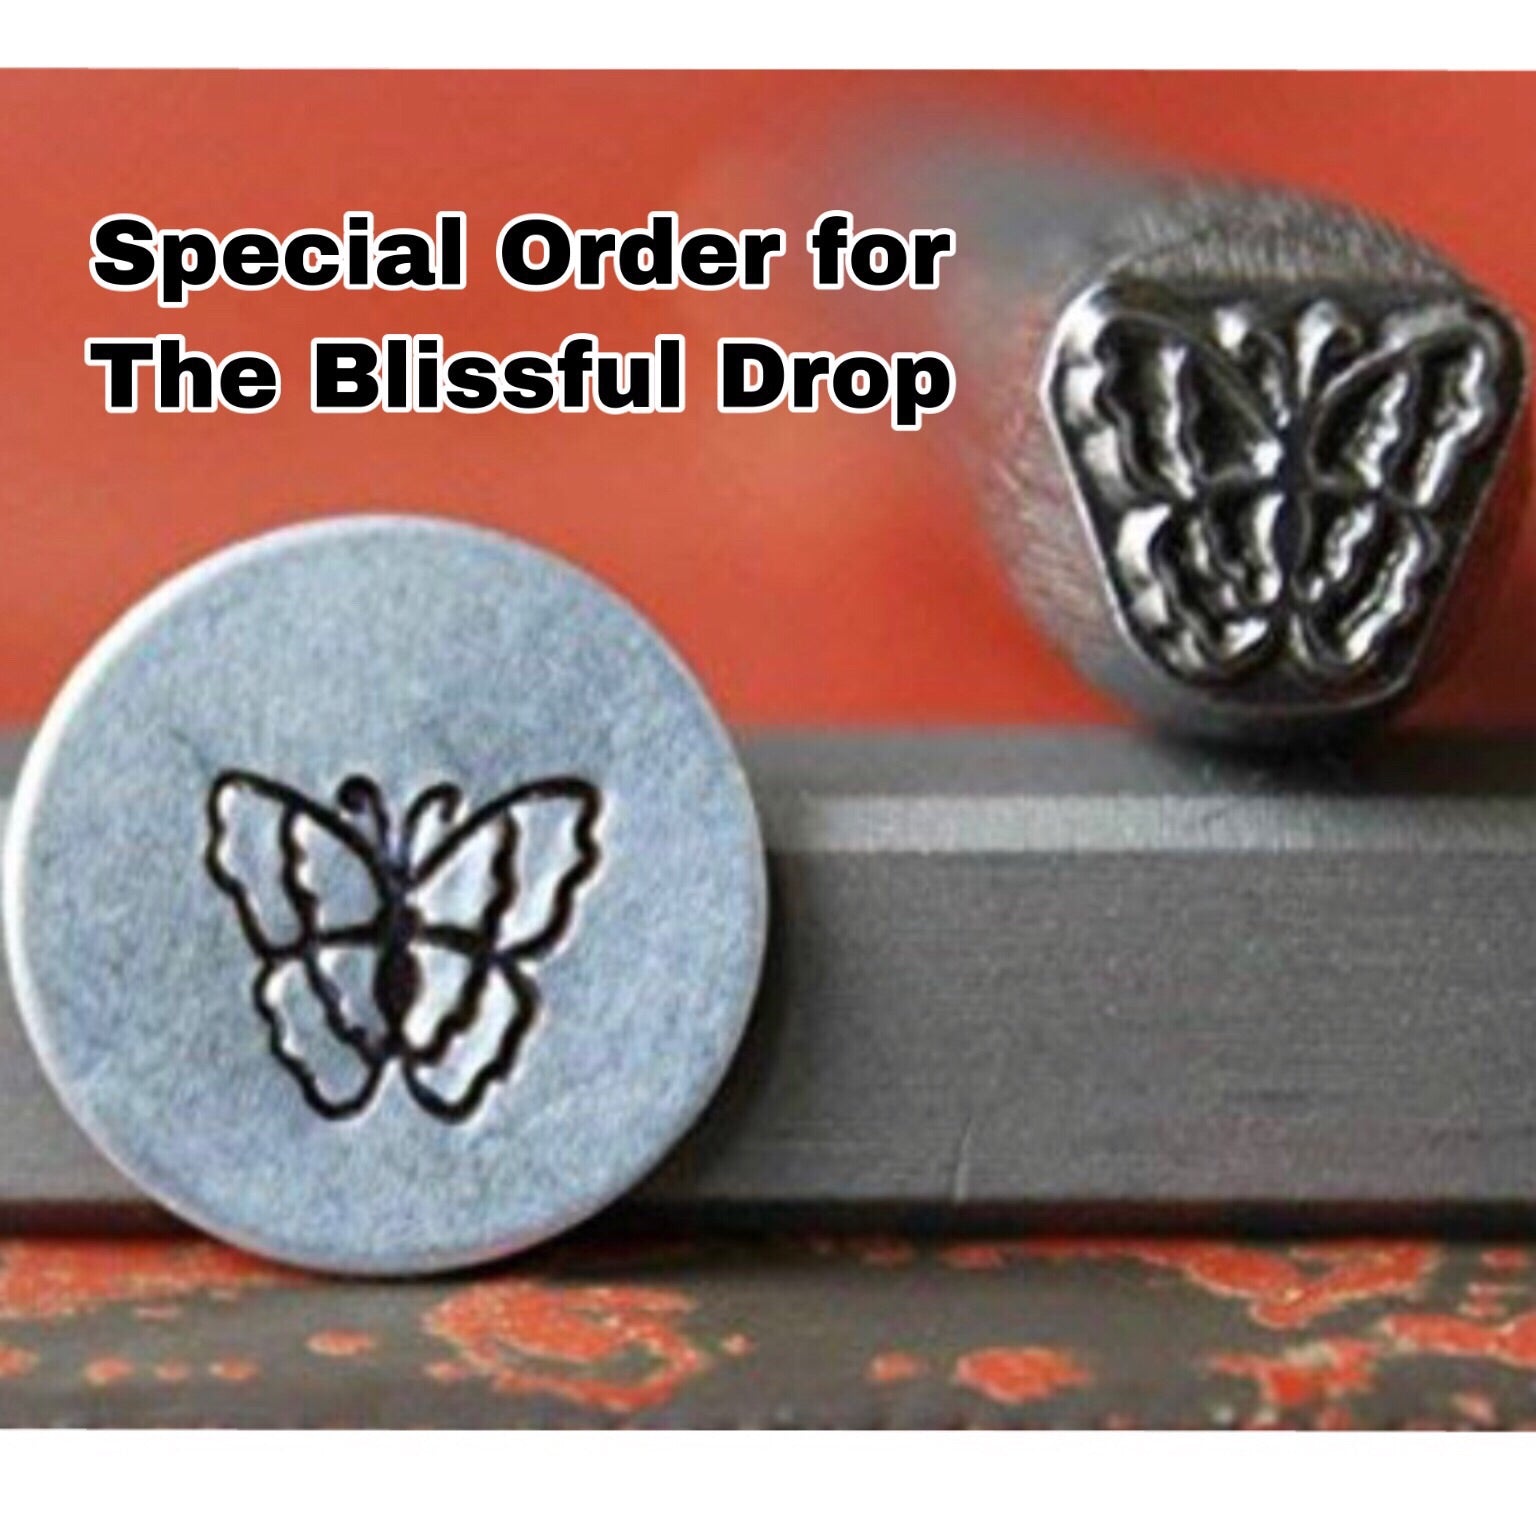 Special Order for the Blissful Drop